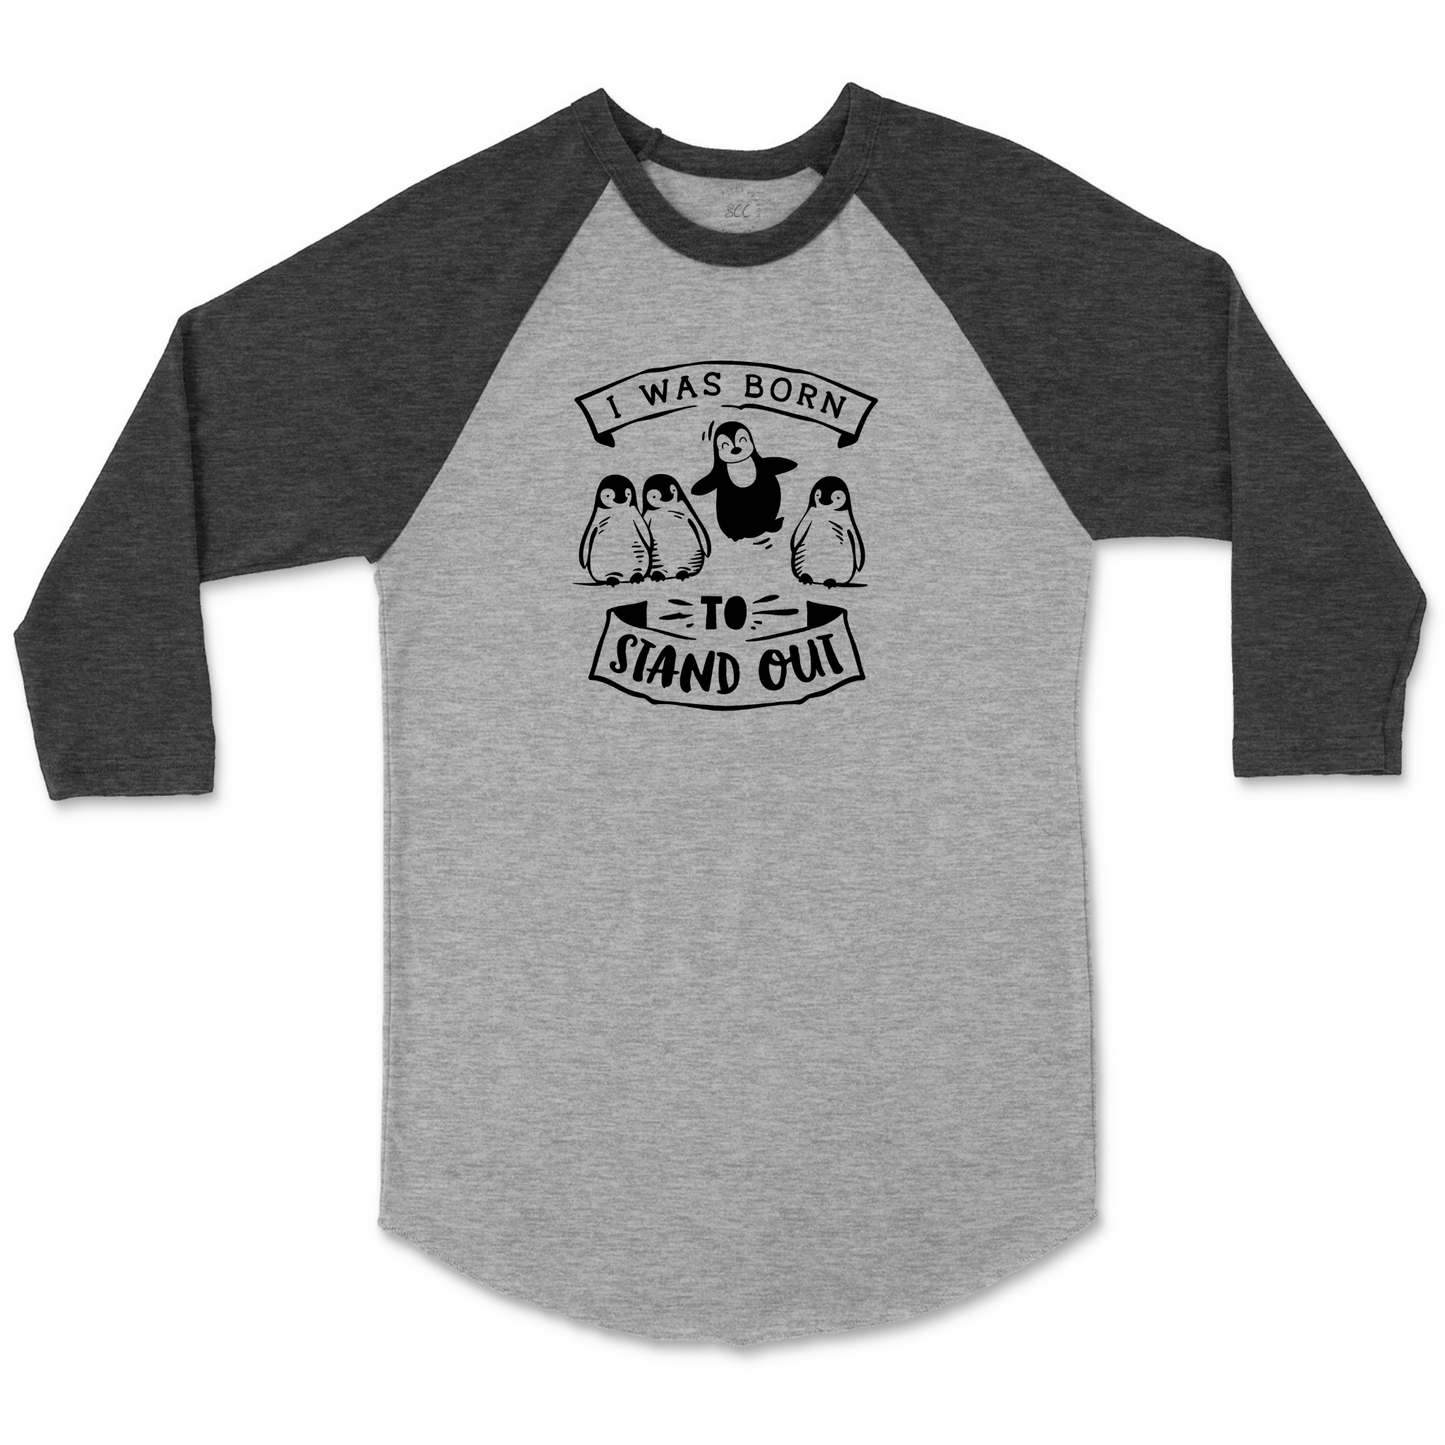 I WAS BORN TO STAND OUT - Unisex Raglan Baseball T-Shirt